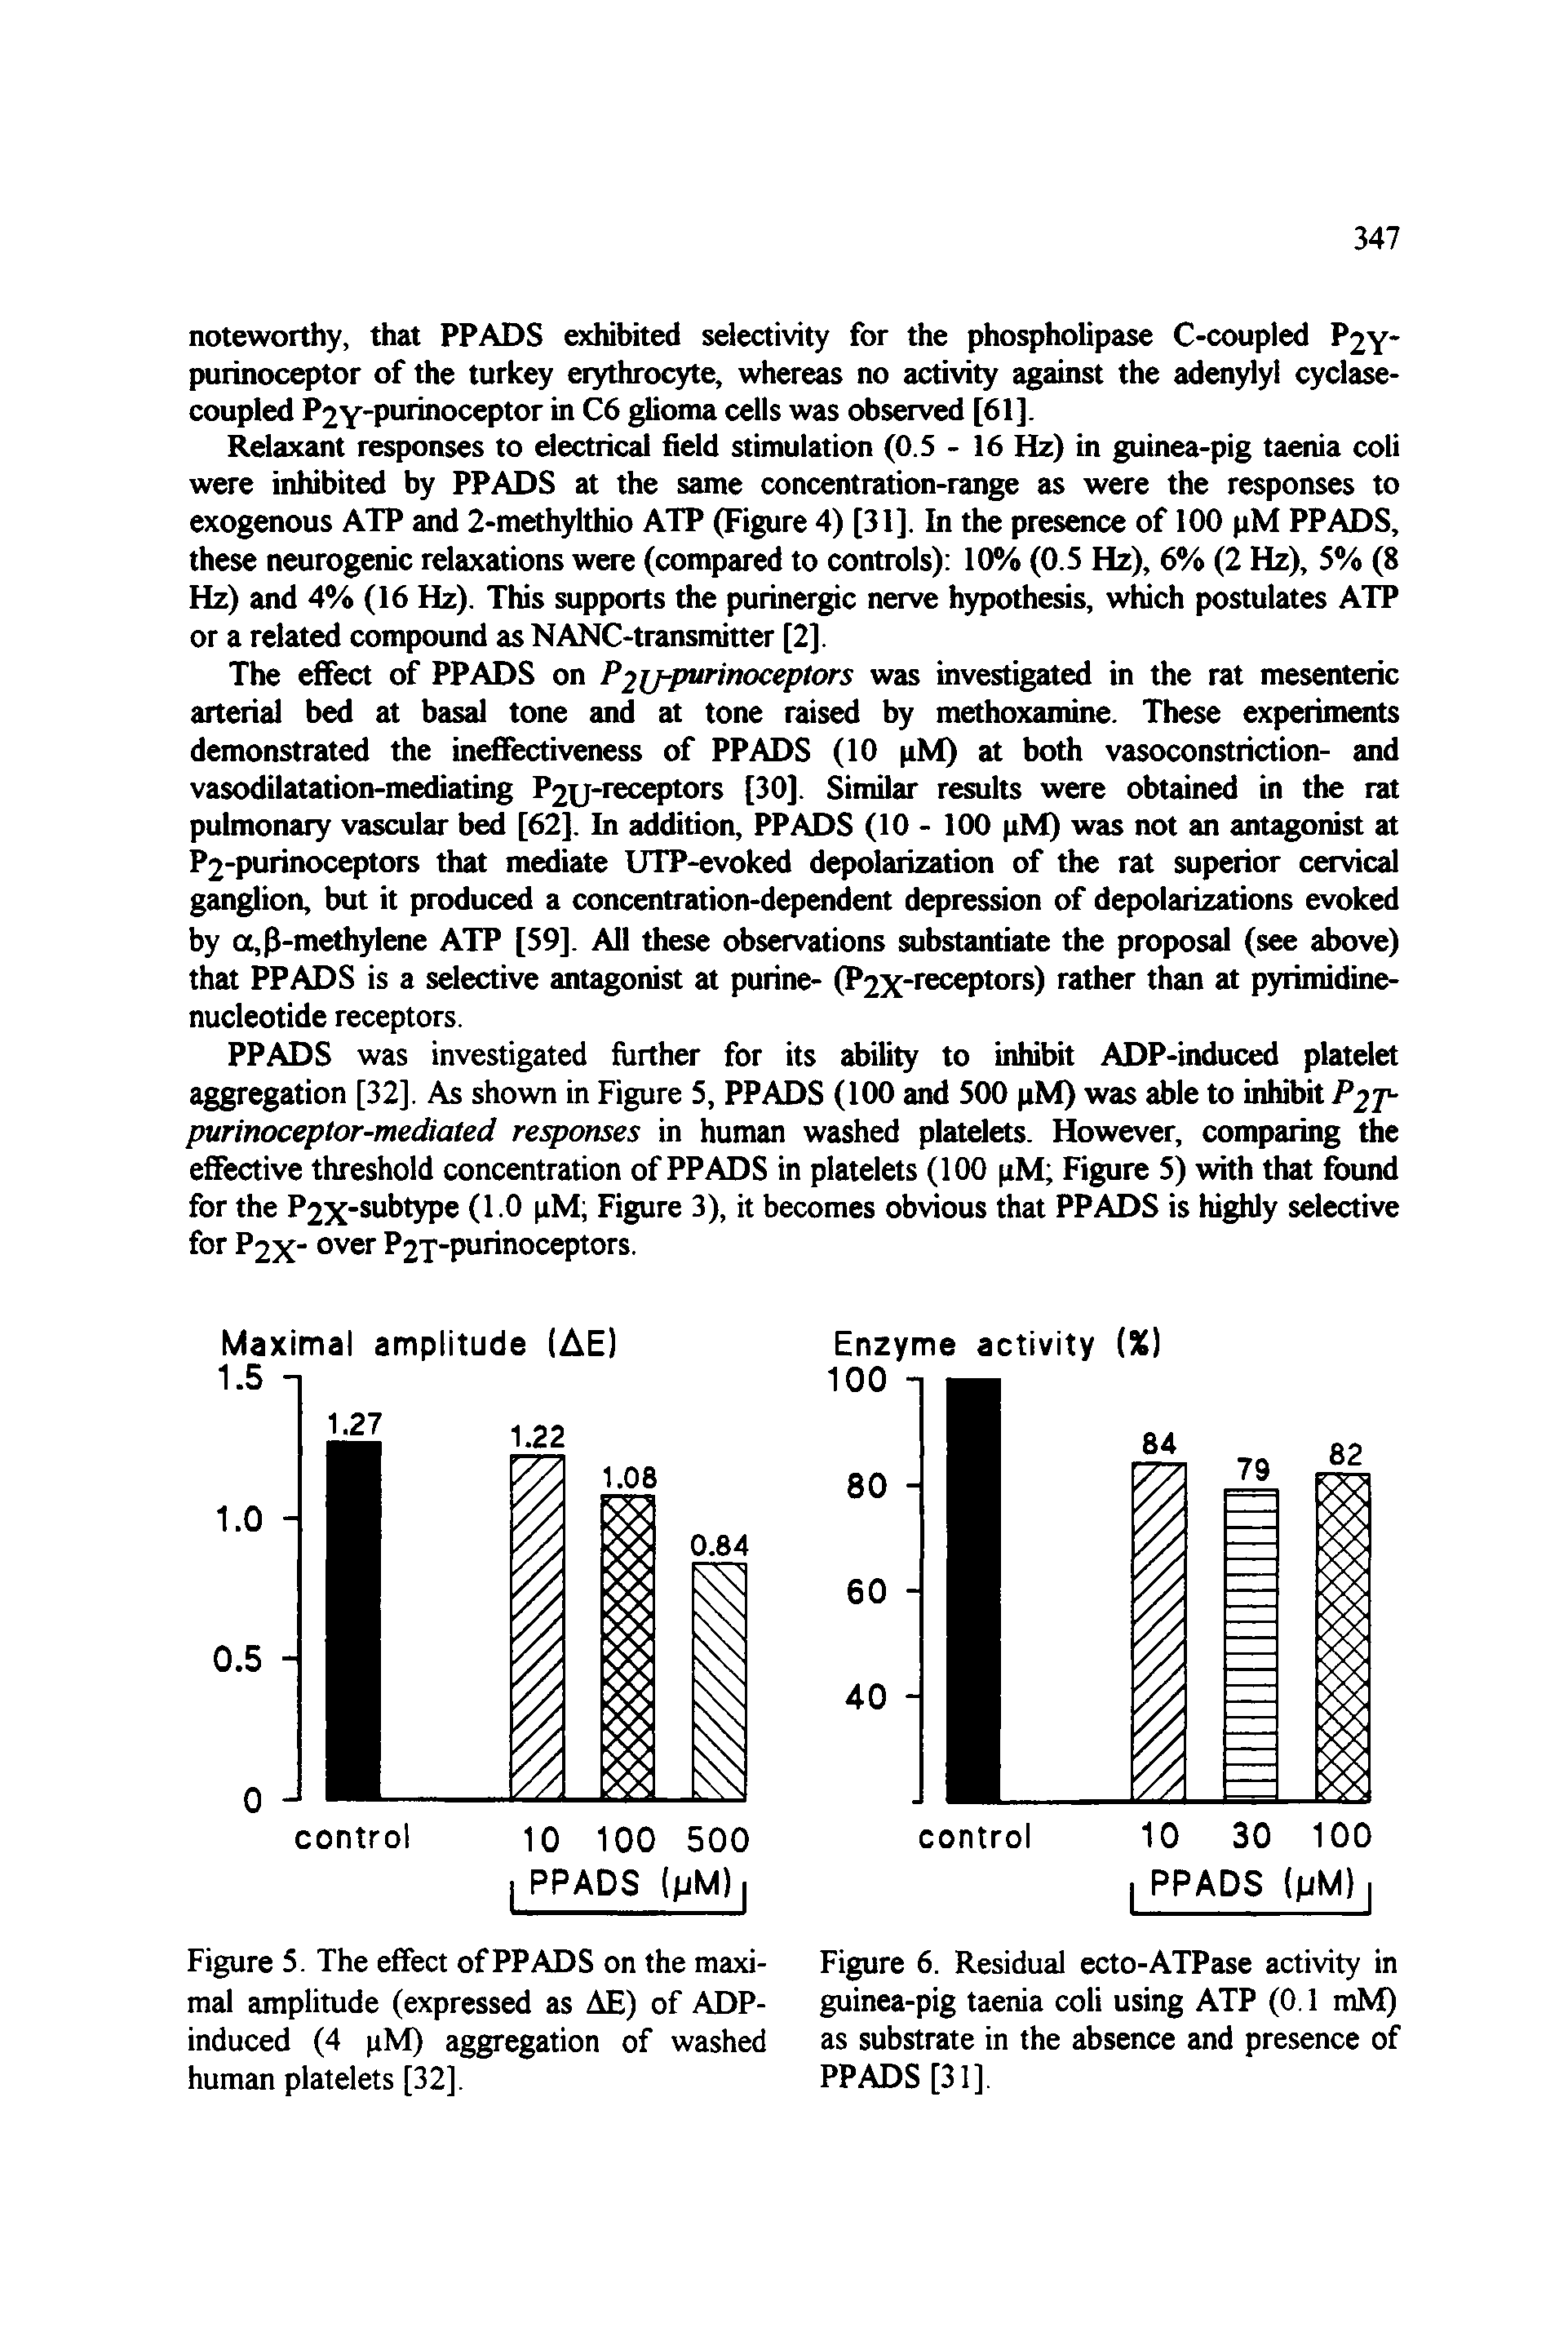 Figure 6. Residual ecto-ATPase activity in guinea-pig taenia coli using ATP (0.1 mM) as substrate in the absence and presence of PPADS [31].